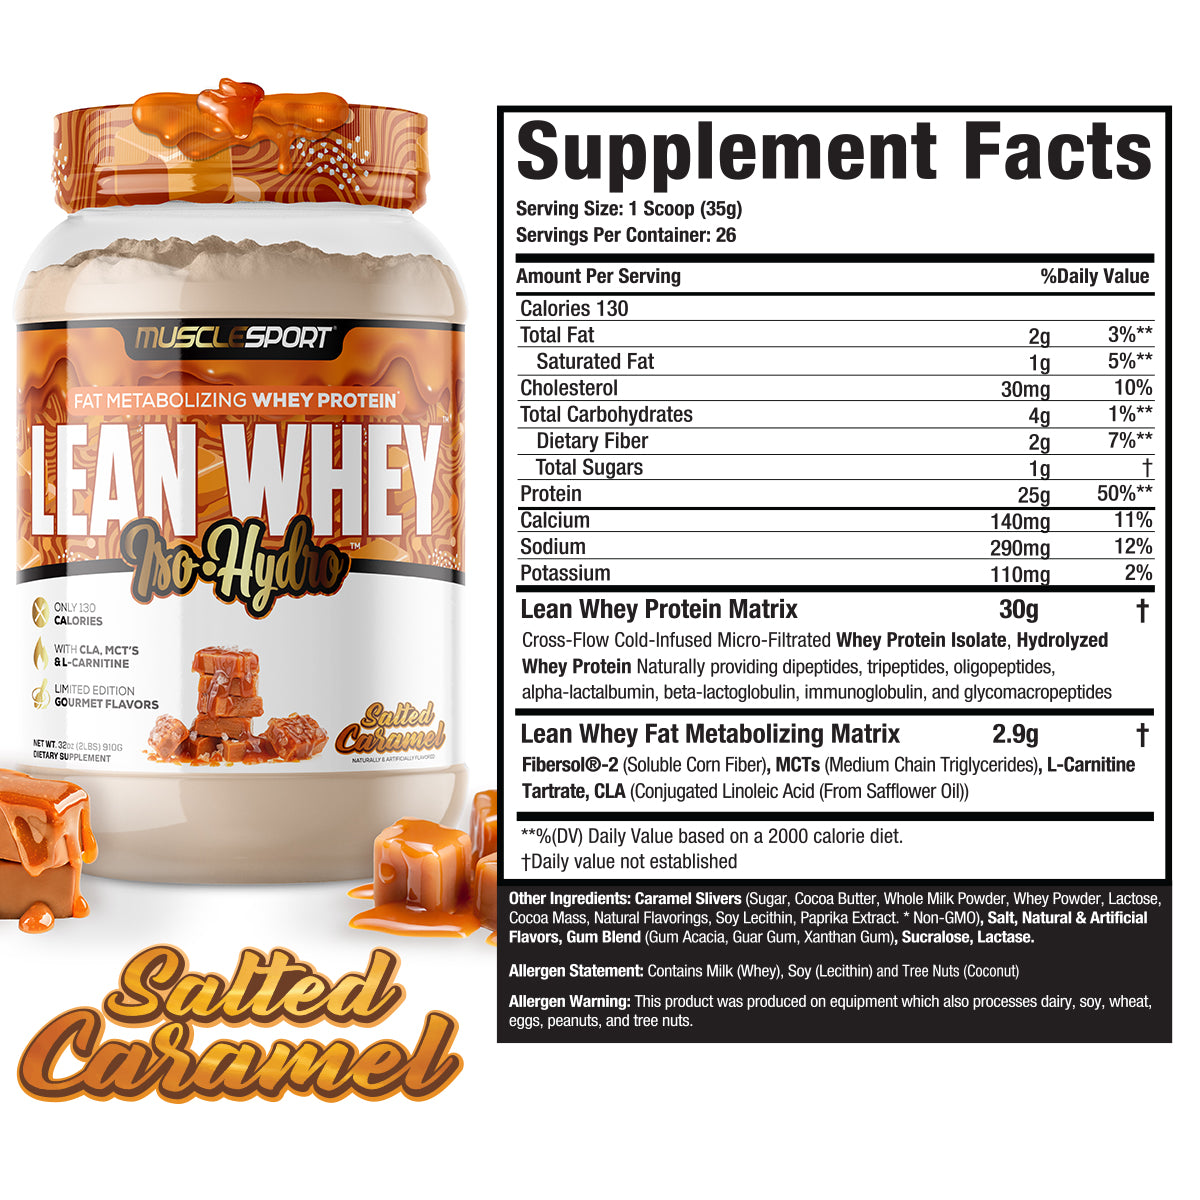 Musclesport Lean Whey Salted Caramel